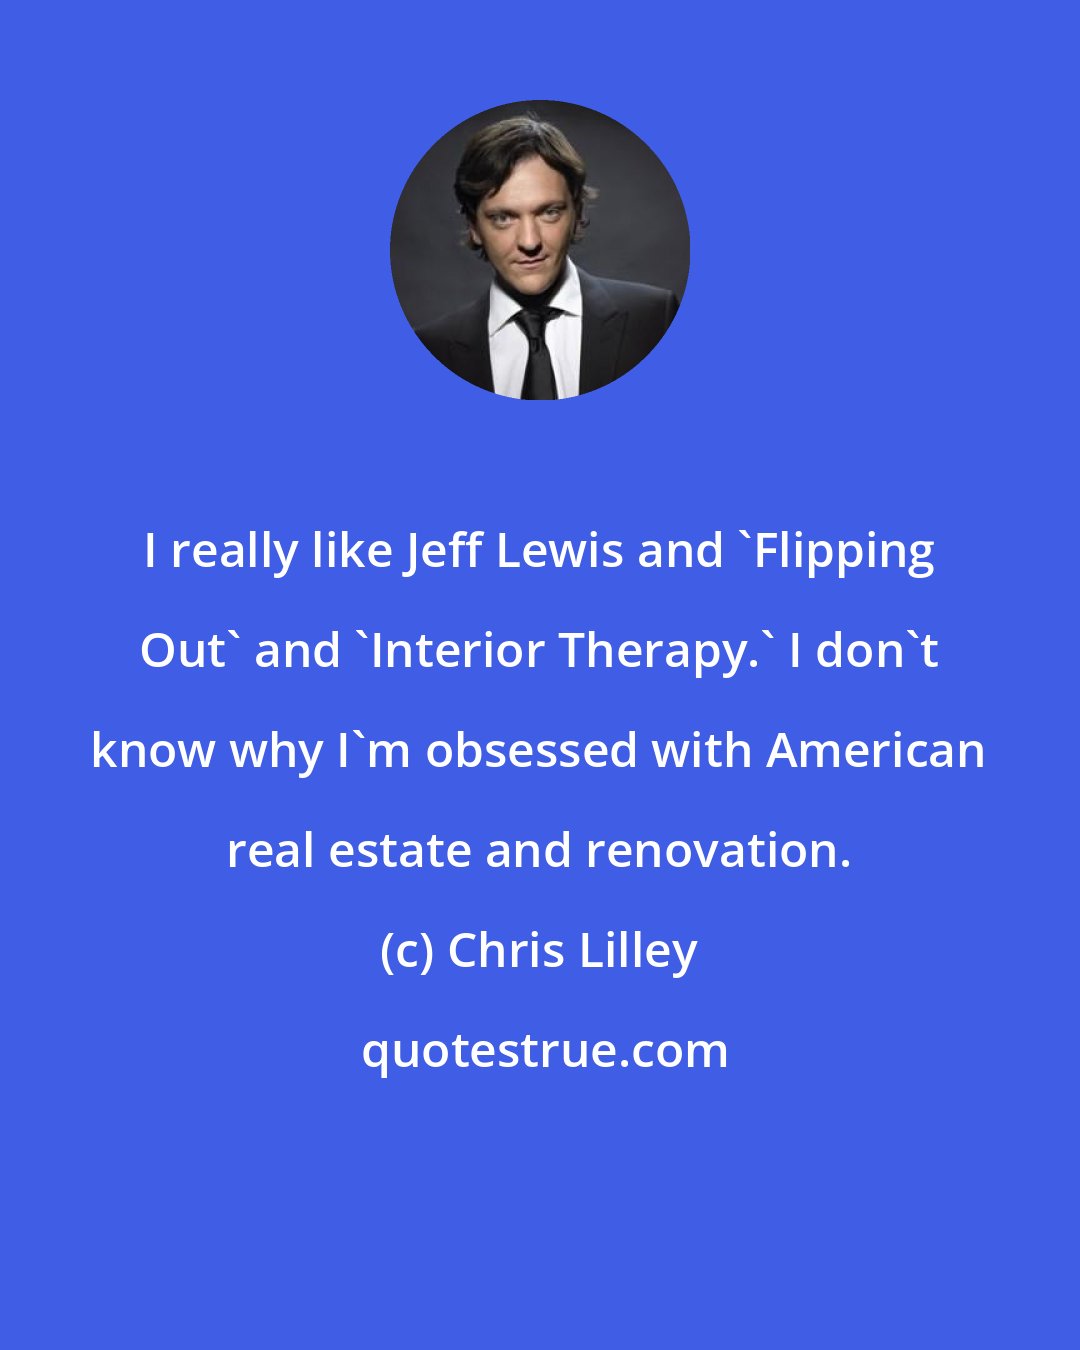 Chris Lilley: I really like Jeff Lewis and 'Flipping Out' and 'Interior Therapy.' I don't know why I'm obsessed with American real estate and renovation.